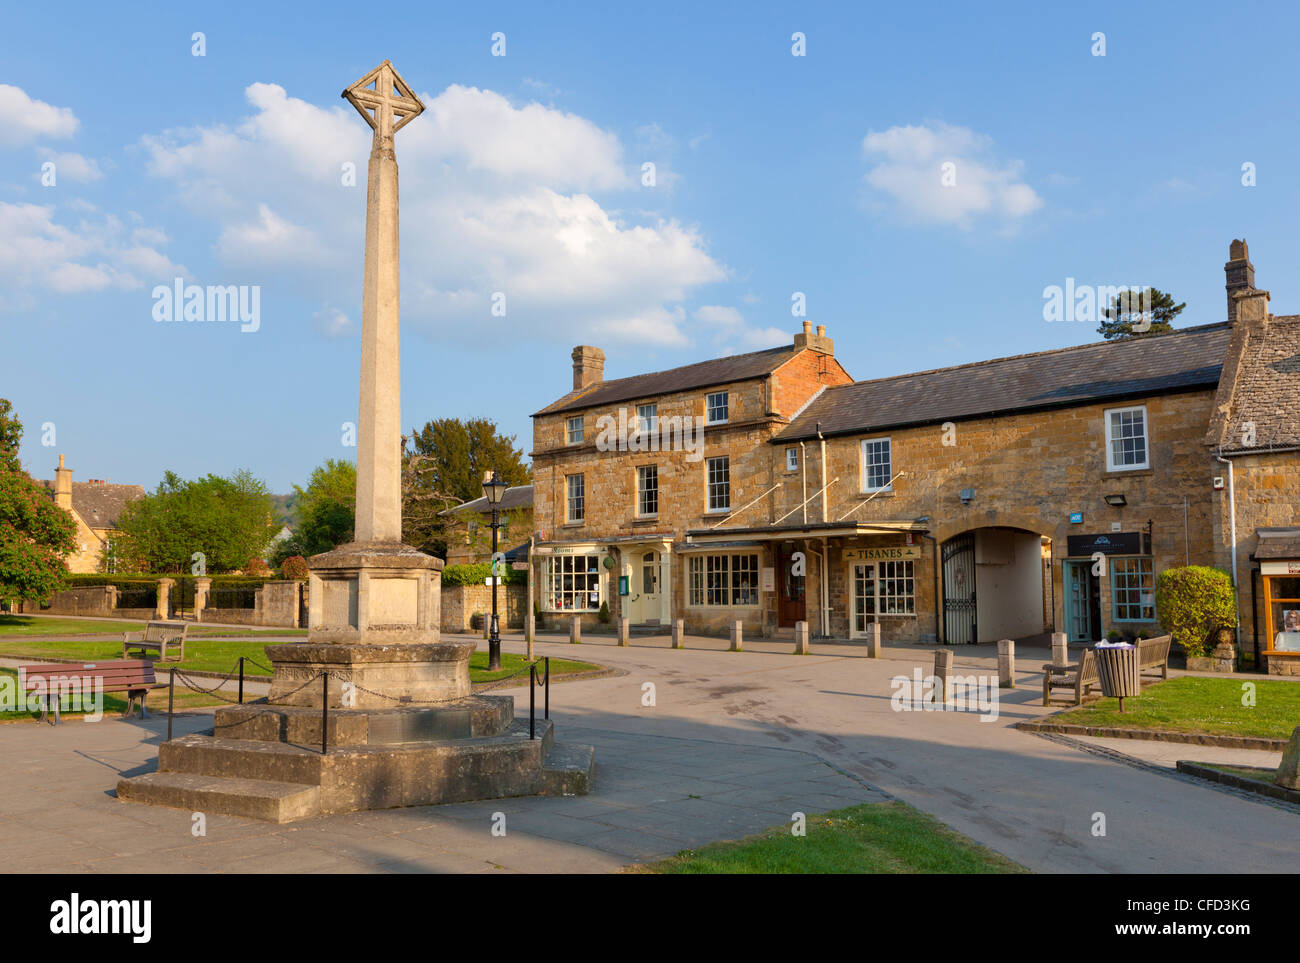 War Memorial stone cross on the High Street in the village of Broadway, The Cotswolds, Worcestershire, England, United Kingdom Stock Photo